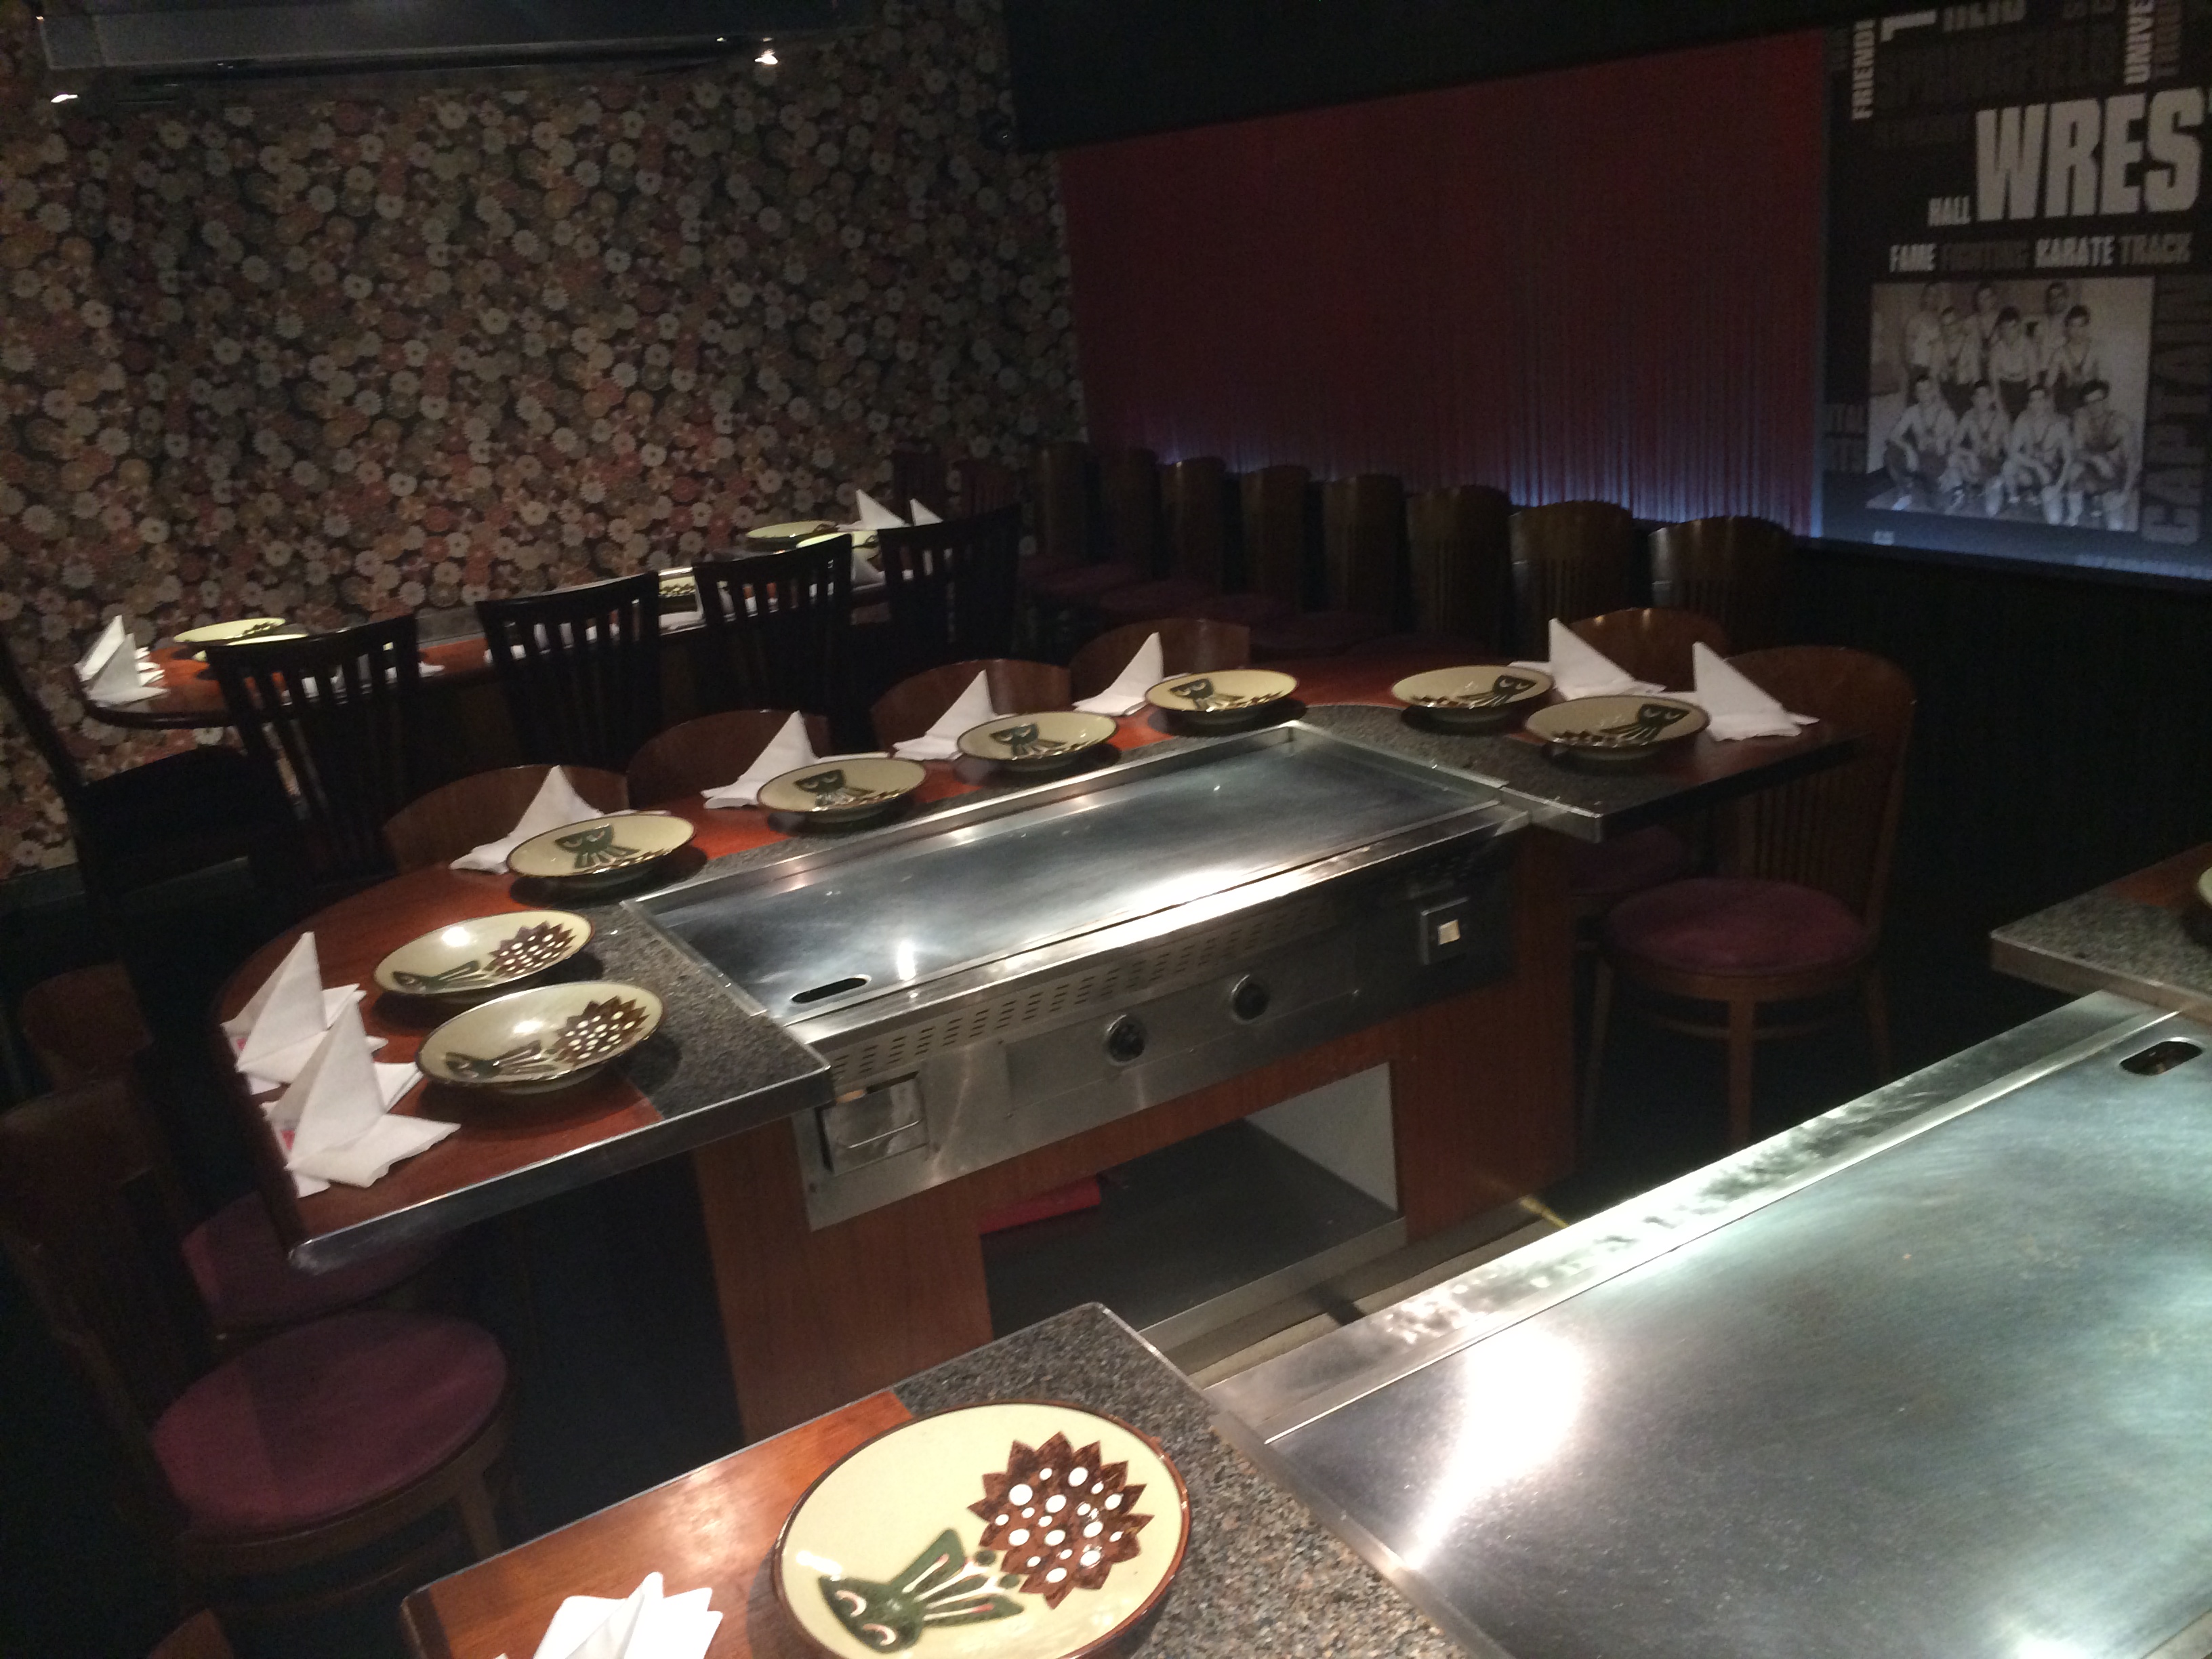 Diners all sit round the teppan plate